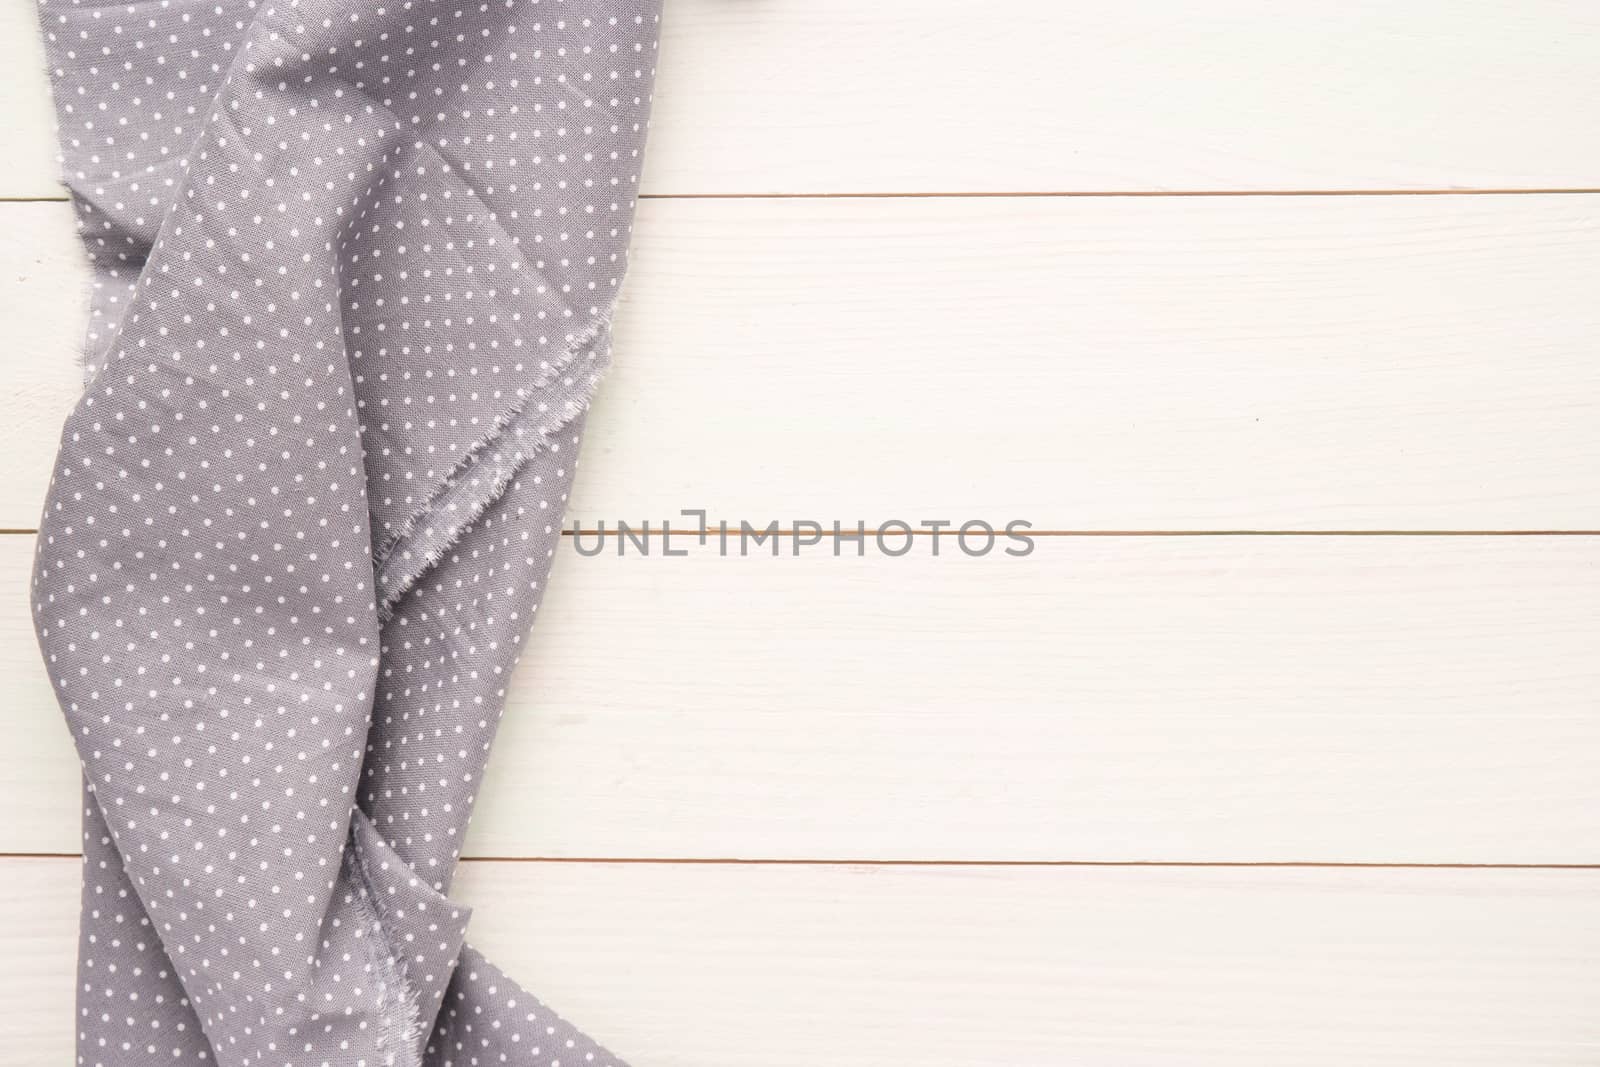 Polka dot fabric over wooden kitchen table. by AnaMarques